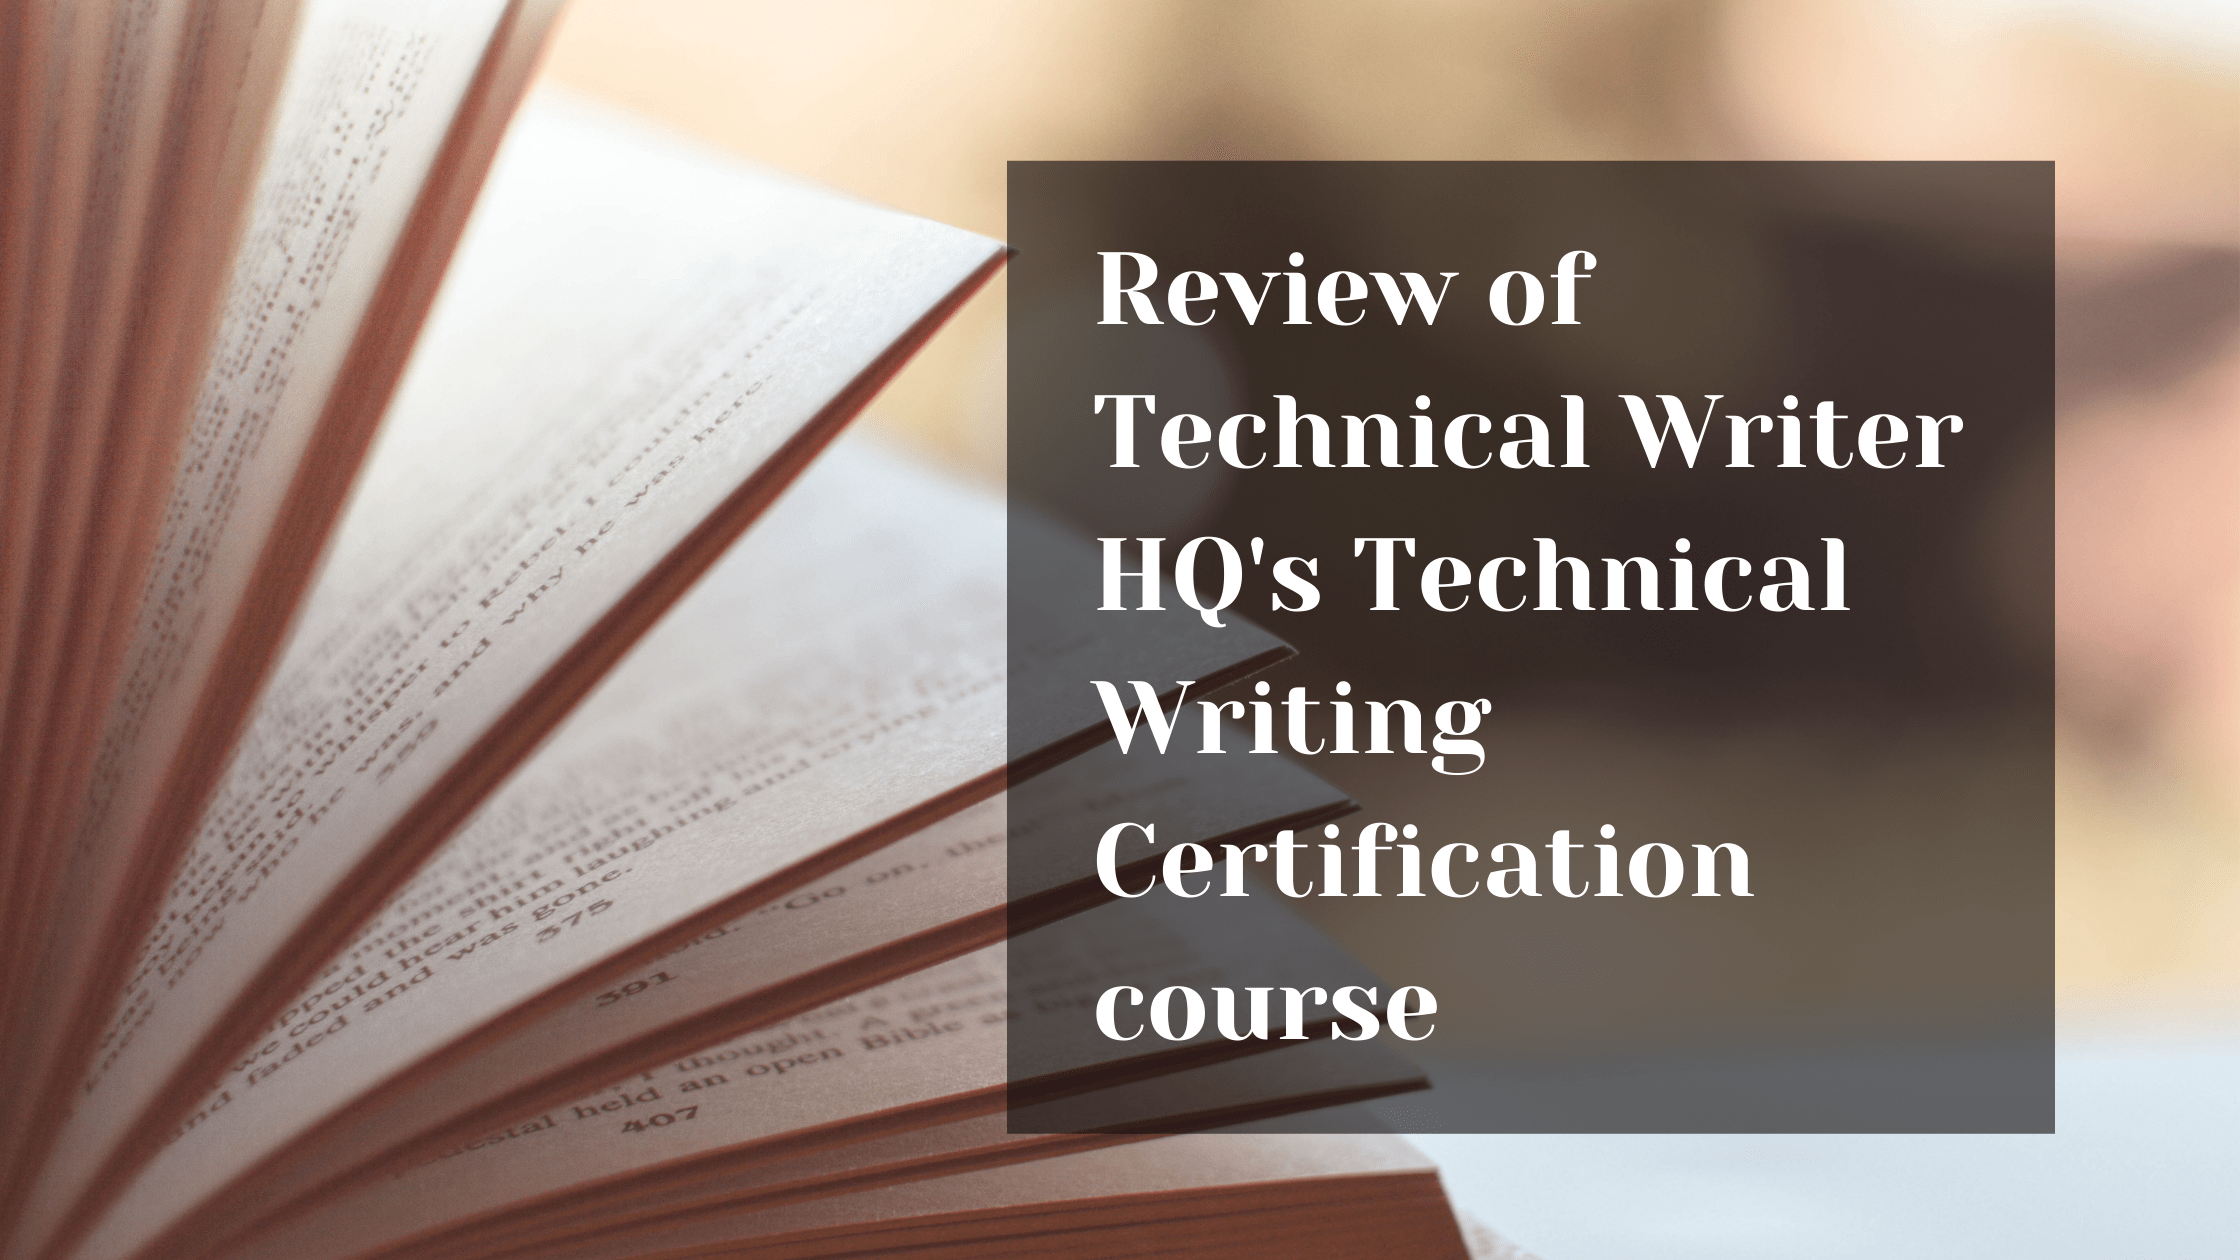 My review of the Technical Writer Certification Course from Technical Writer HQ.